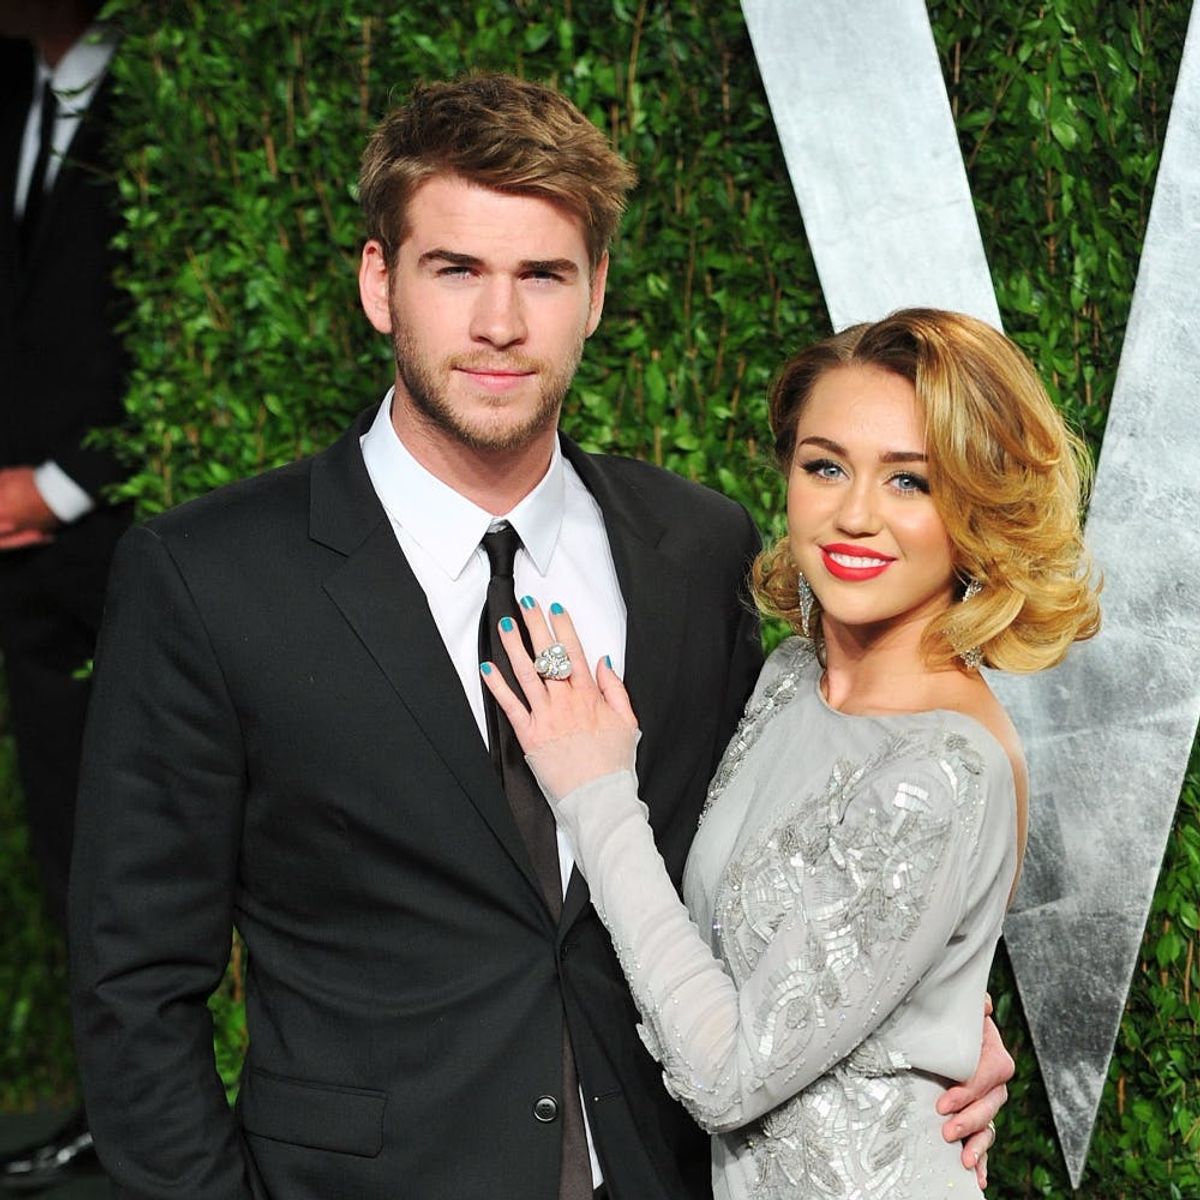 Miley Cyrus’ Strange New Tattoo Is All About Liam Hemsworth’s Fave Food